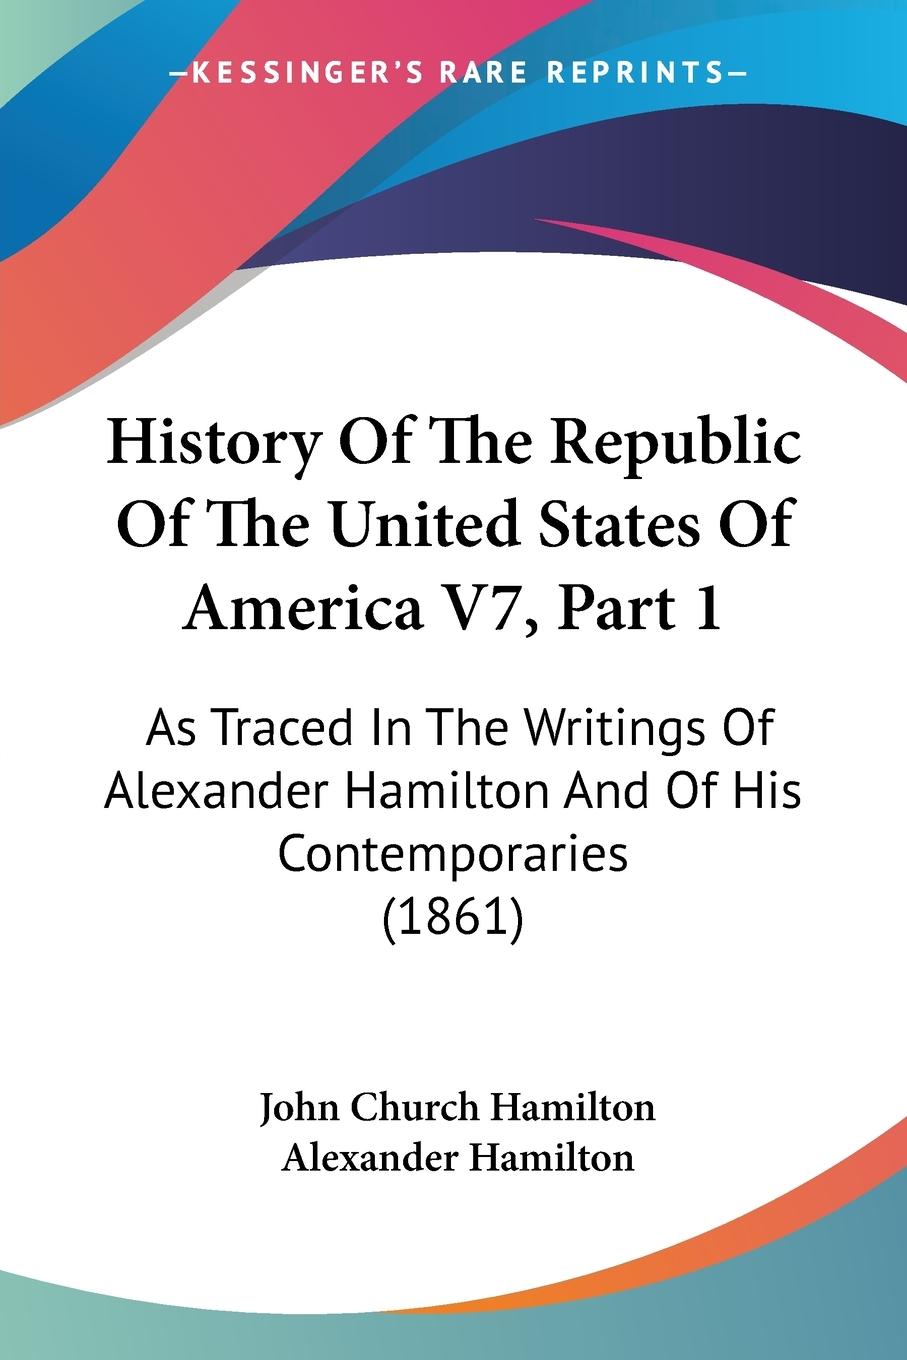 History Of The Republic Of The United States Of America V7, Part 1: As Traced In The Writings Of Alexander Hamilton And Of His Contemporaries (1861)